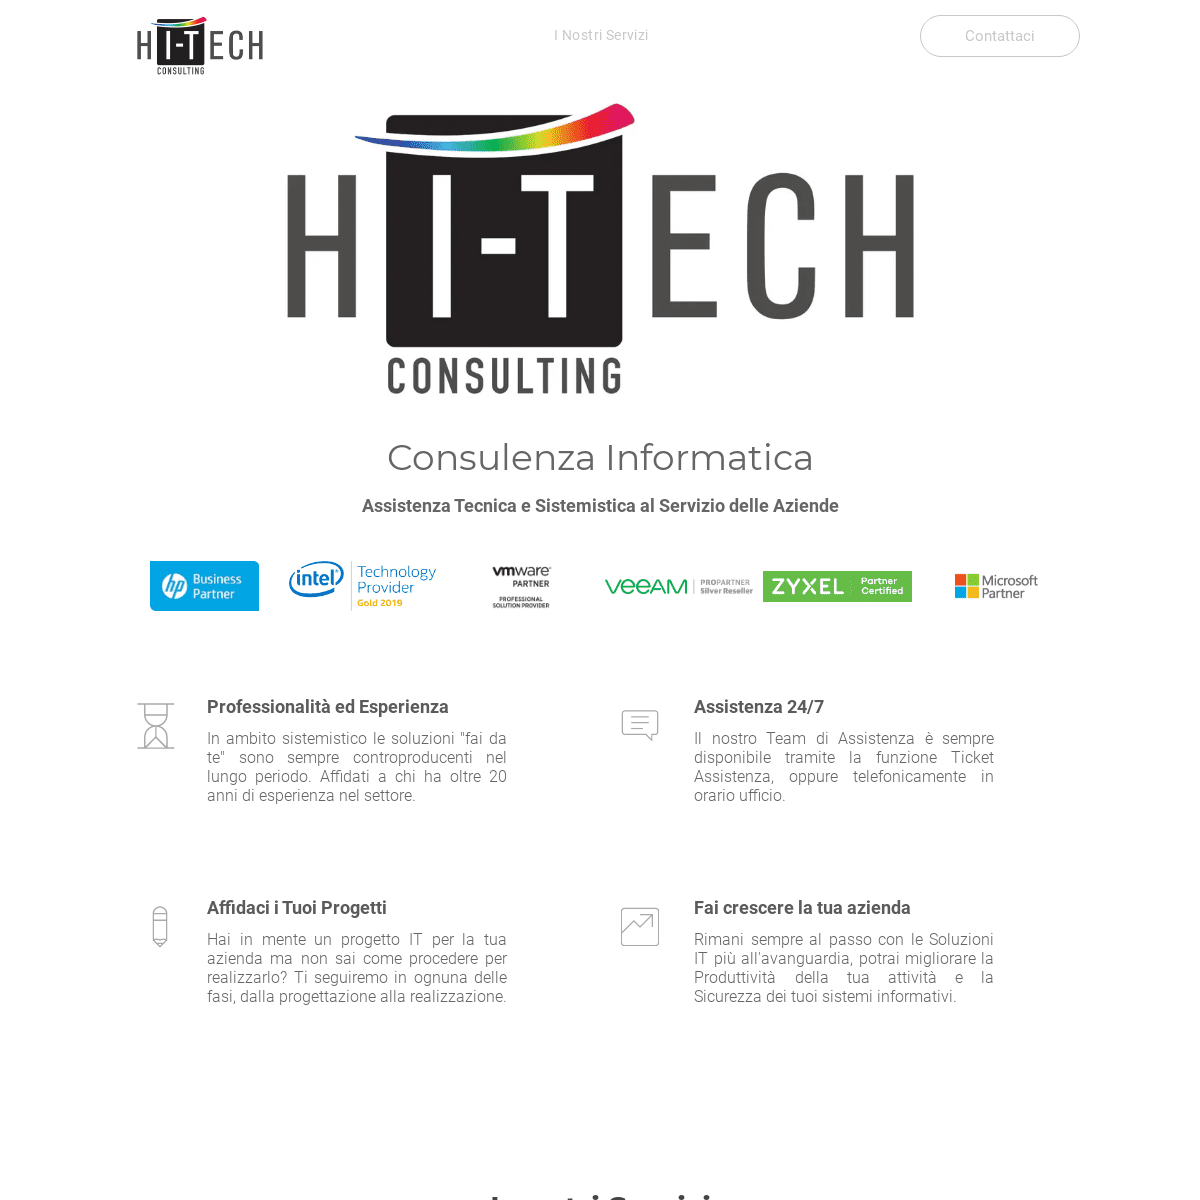 A complete backup of hitechconsulting.it